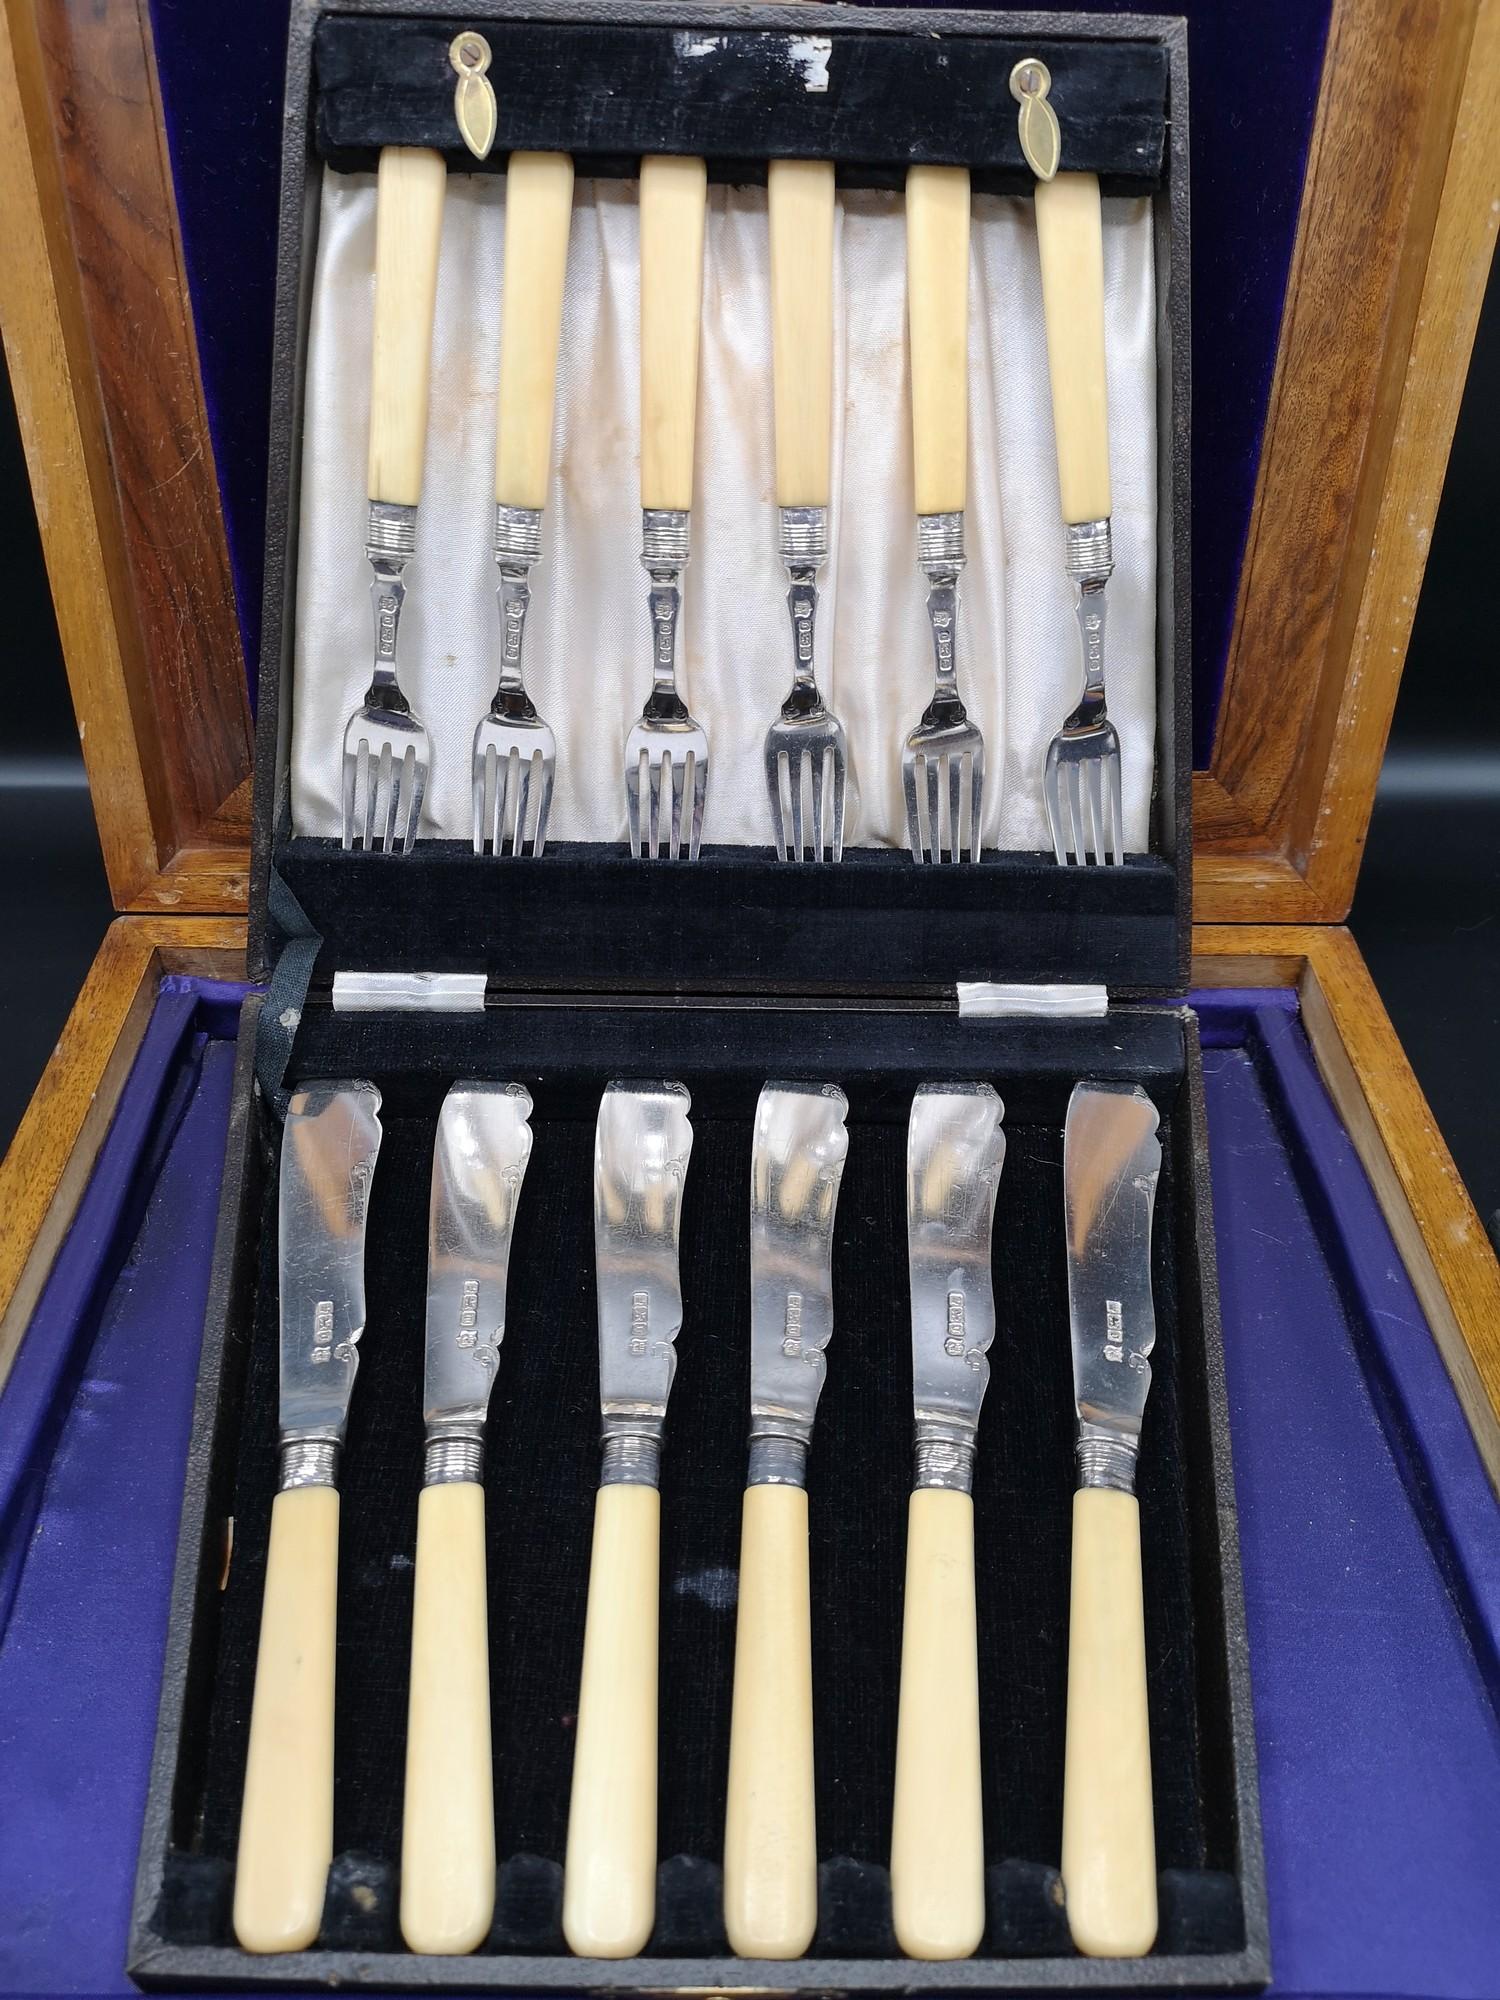 Silver Hall marked sheffield bladed and collard forks and knifes with ivory handles. Maker CB&S.